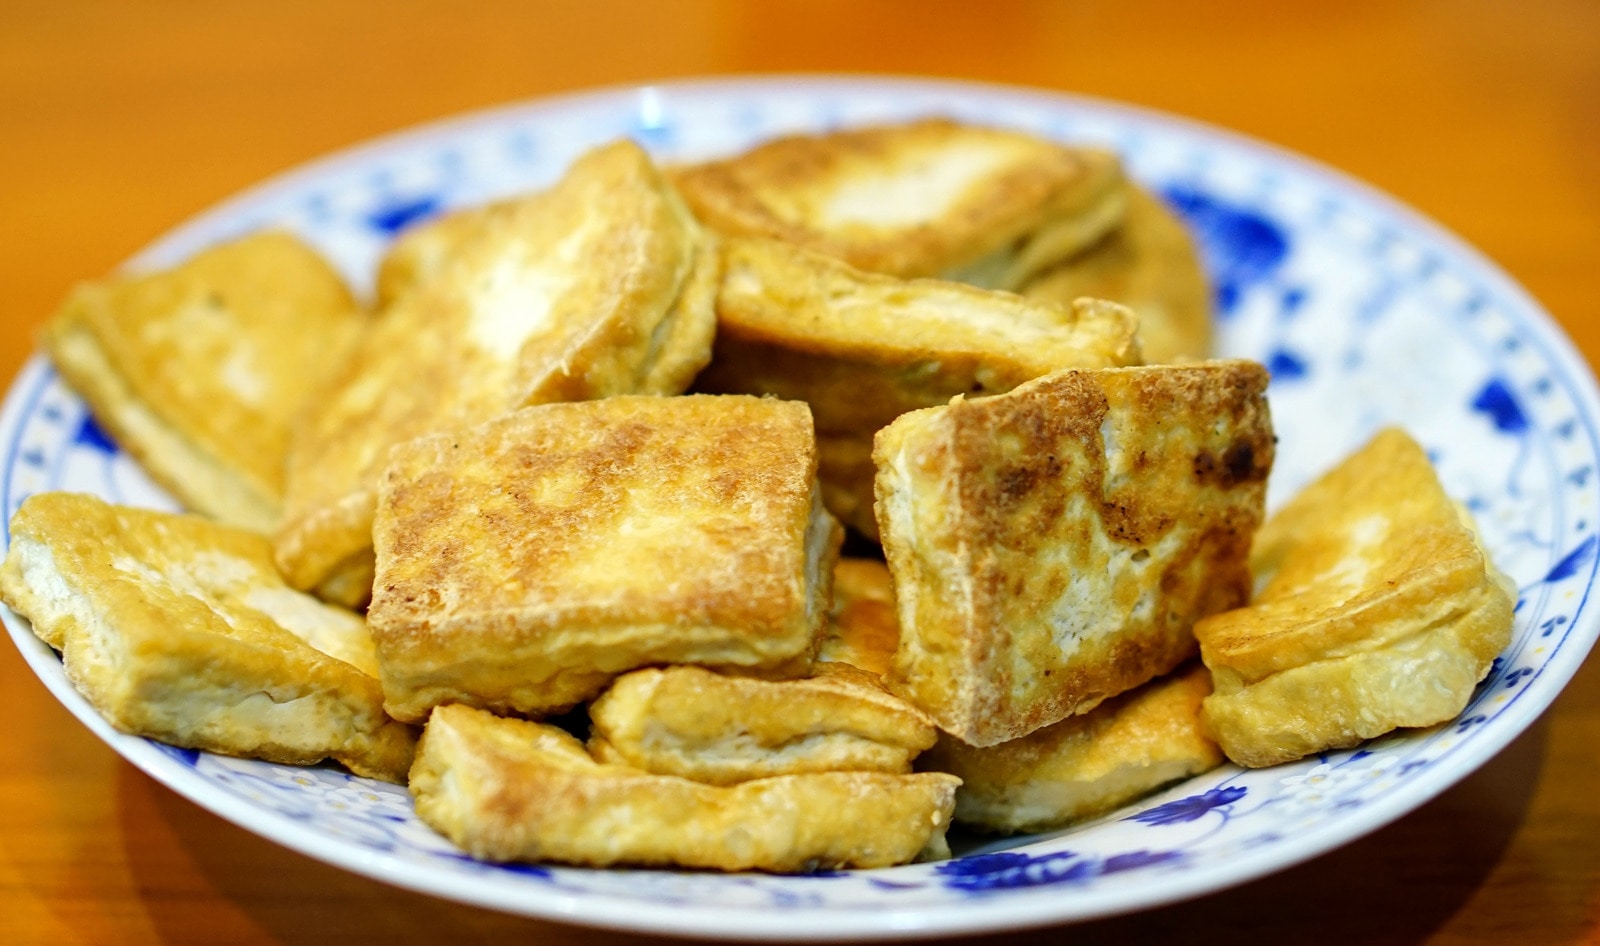 Tofu Shortages Spread Across Canada After Release of New Food Guide